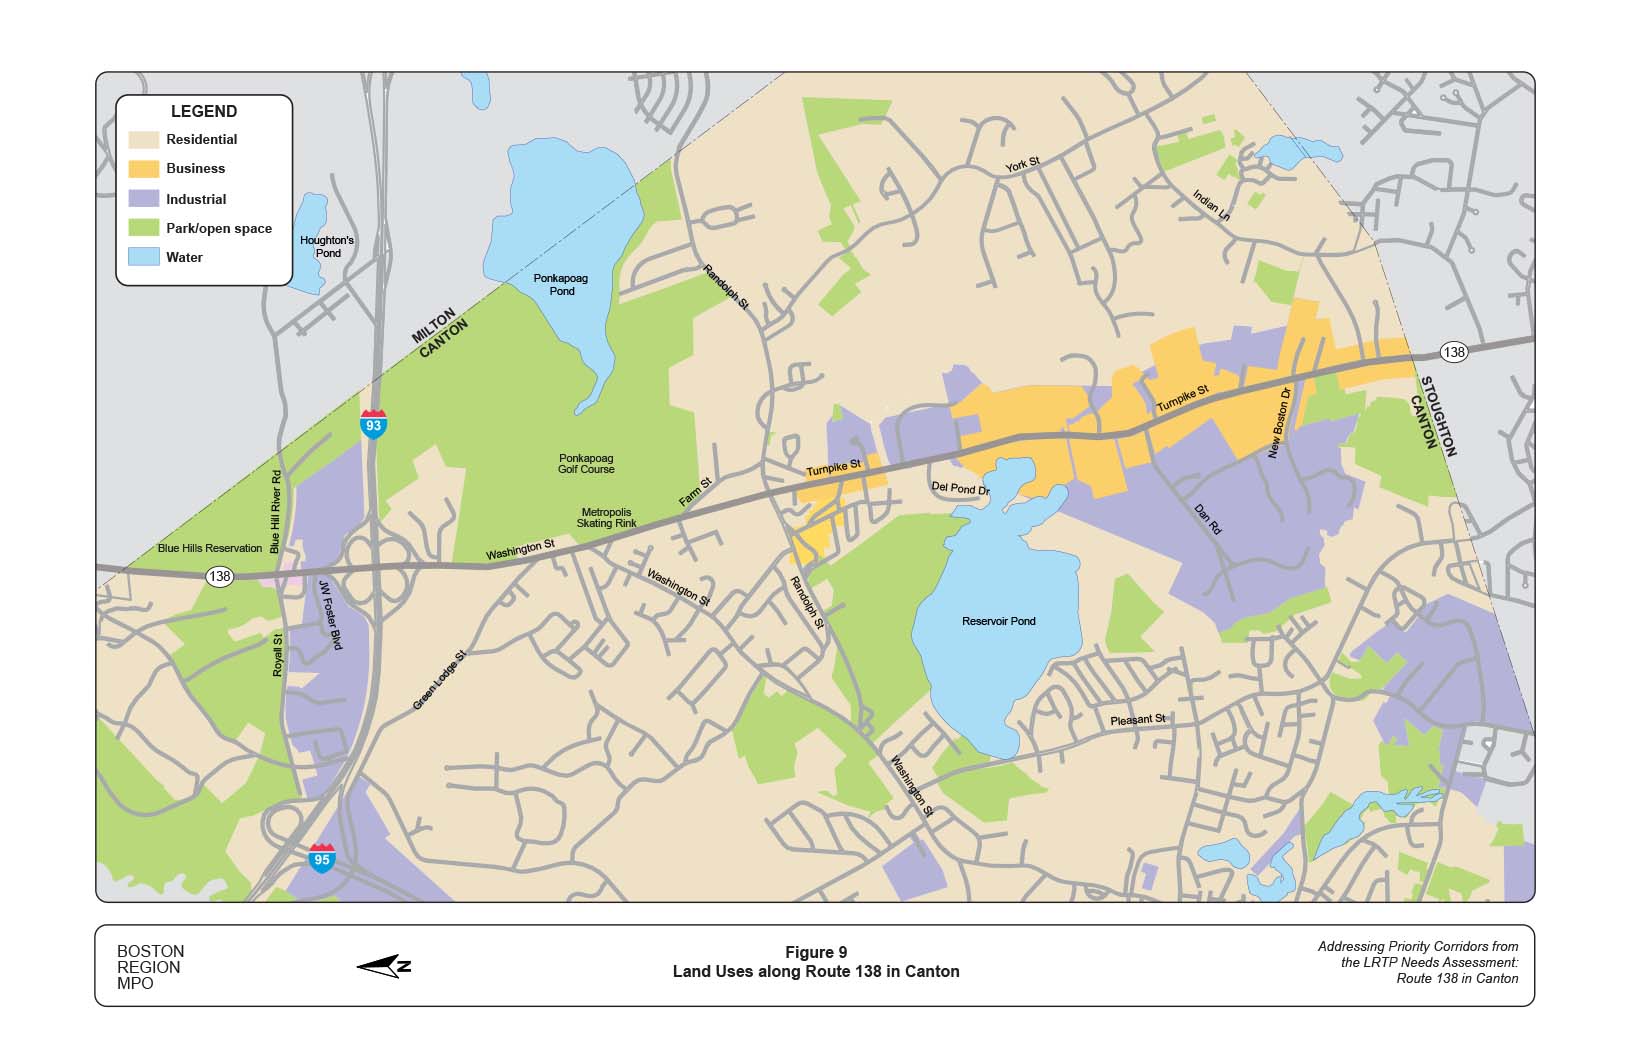 Figure 9 is a map of the study area showing land uses along Route 138.